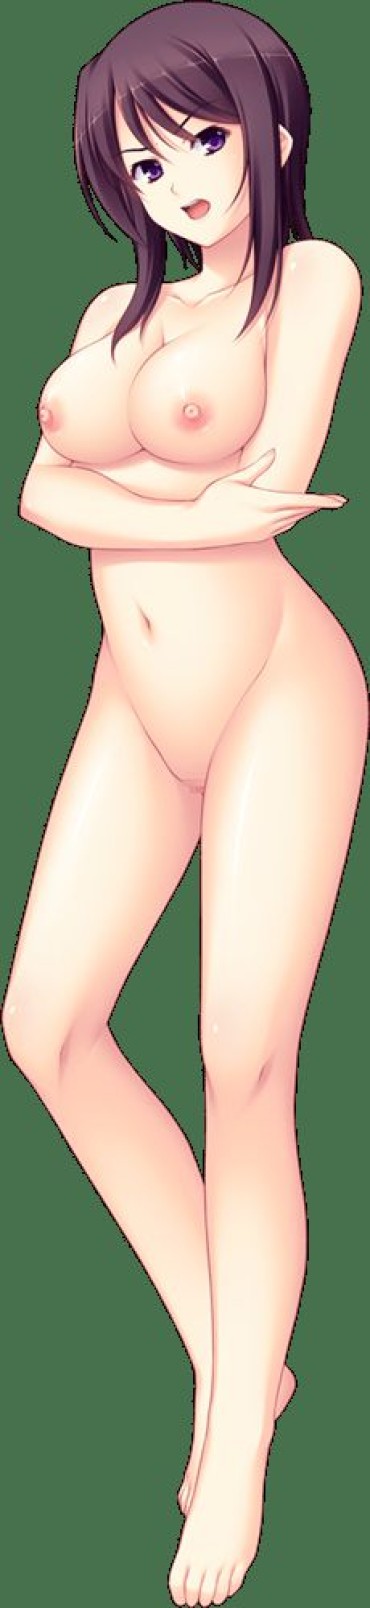 Gay Handjob [Chara Material] The Ninth Of The Bare Standing Picture I Collected Only The Transparent Material Png Pick Up